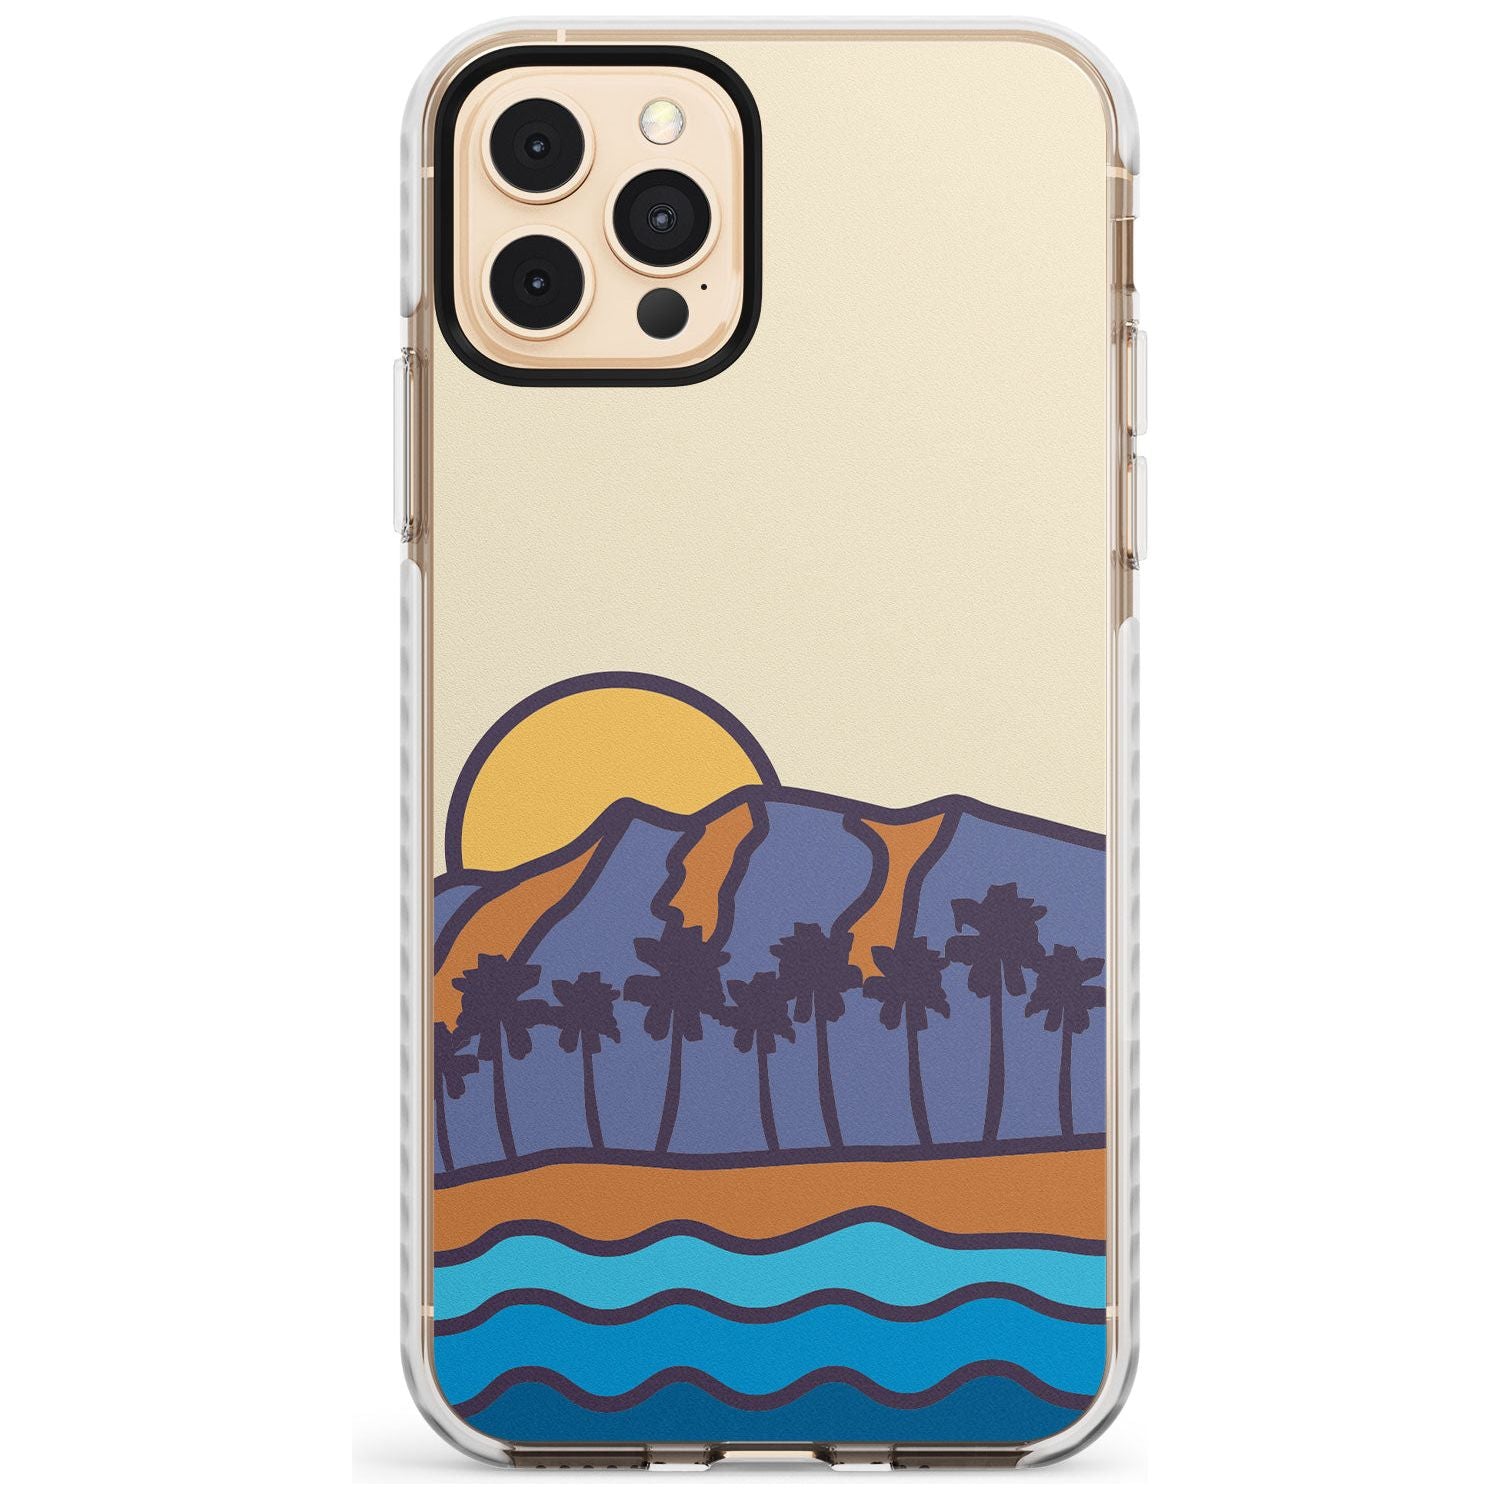 South Sunset Slim TPU Phone Case for iPhone 11 Pro Max